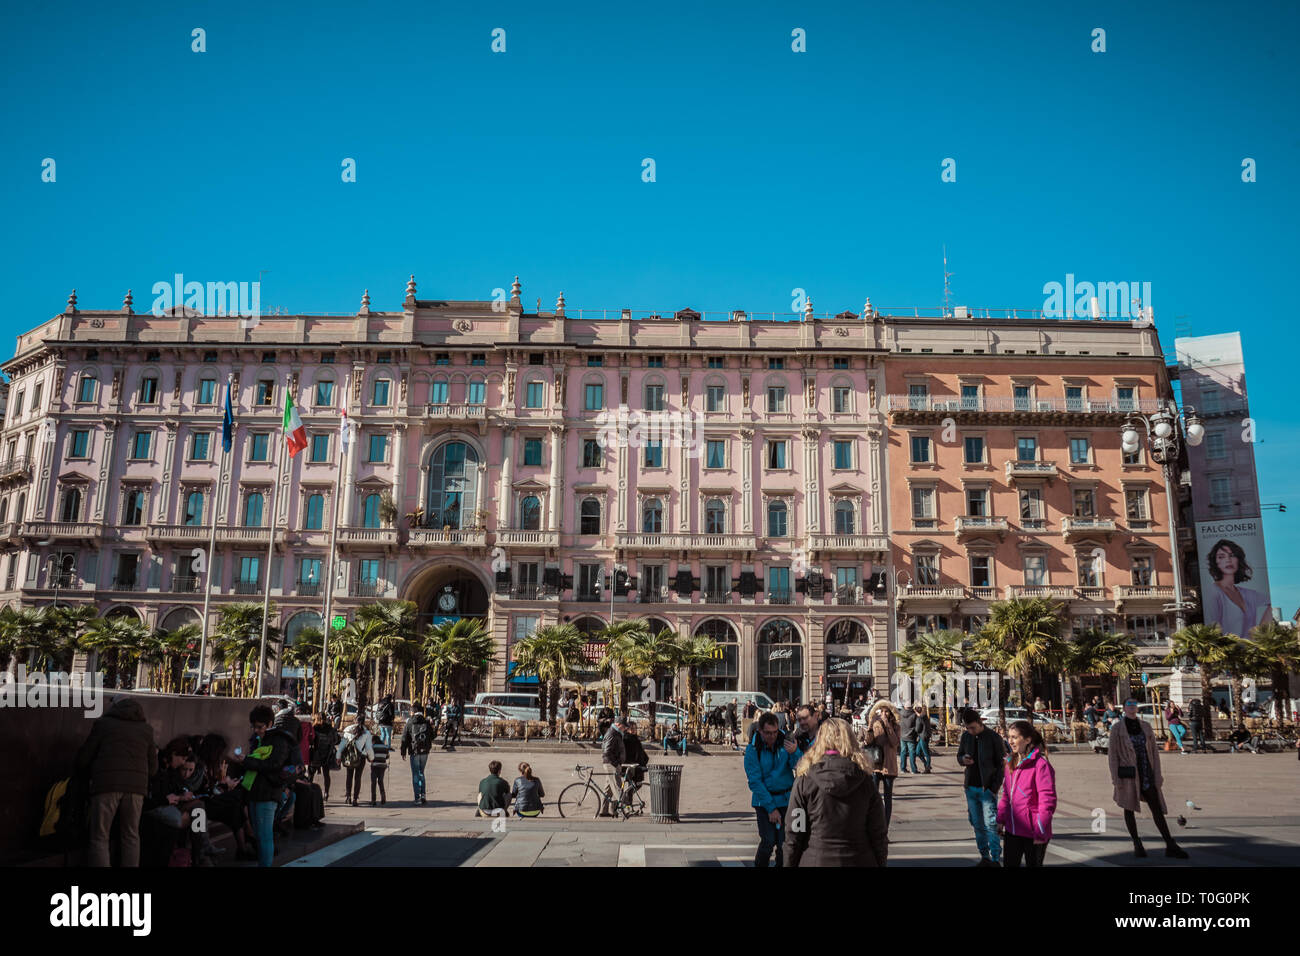 Central square, Milan, Italy Stock Photo